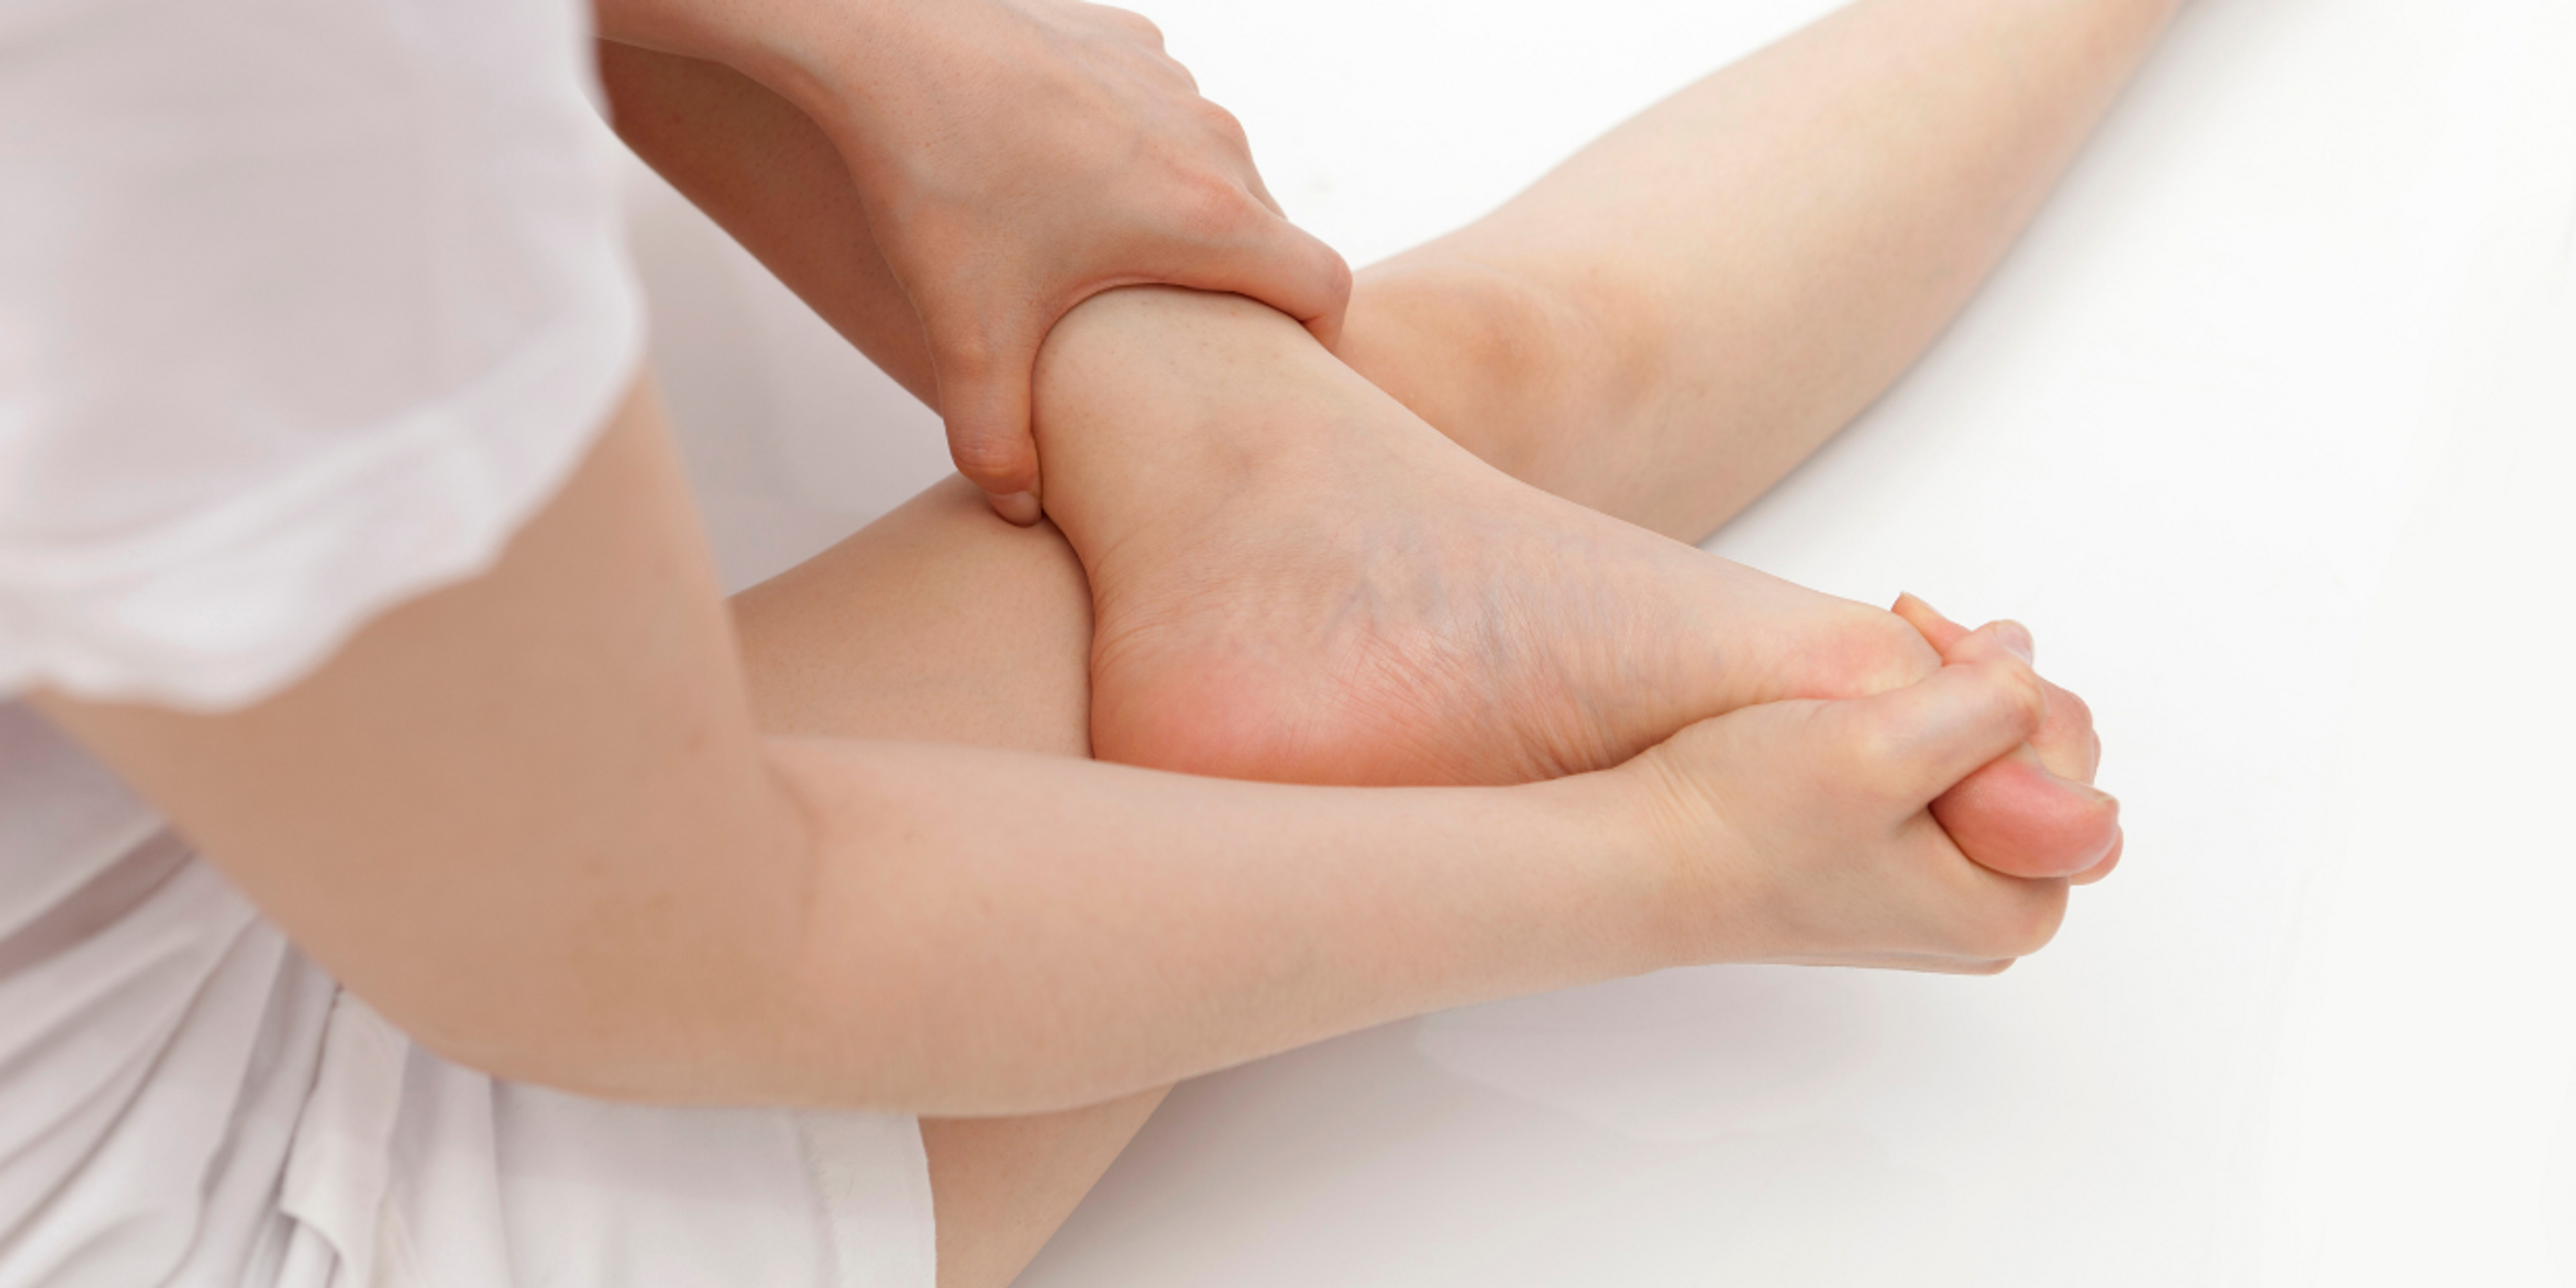 If your sprained ankle remains stiff, manual mobilization may help.